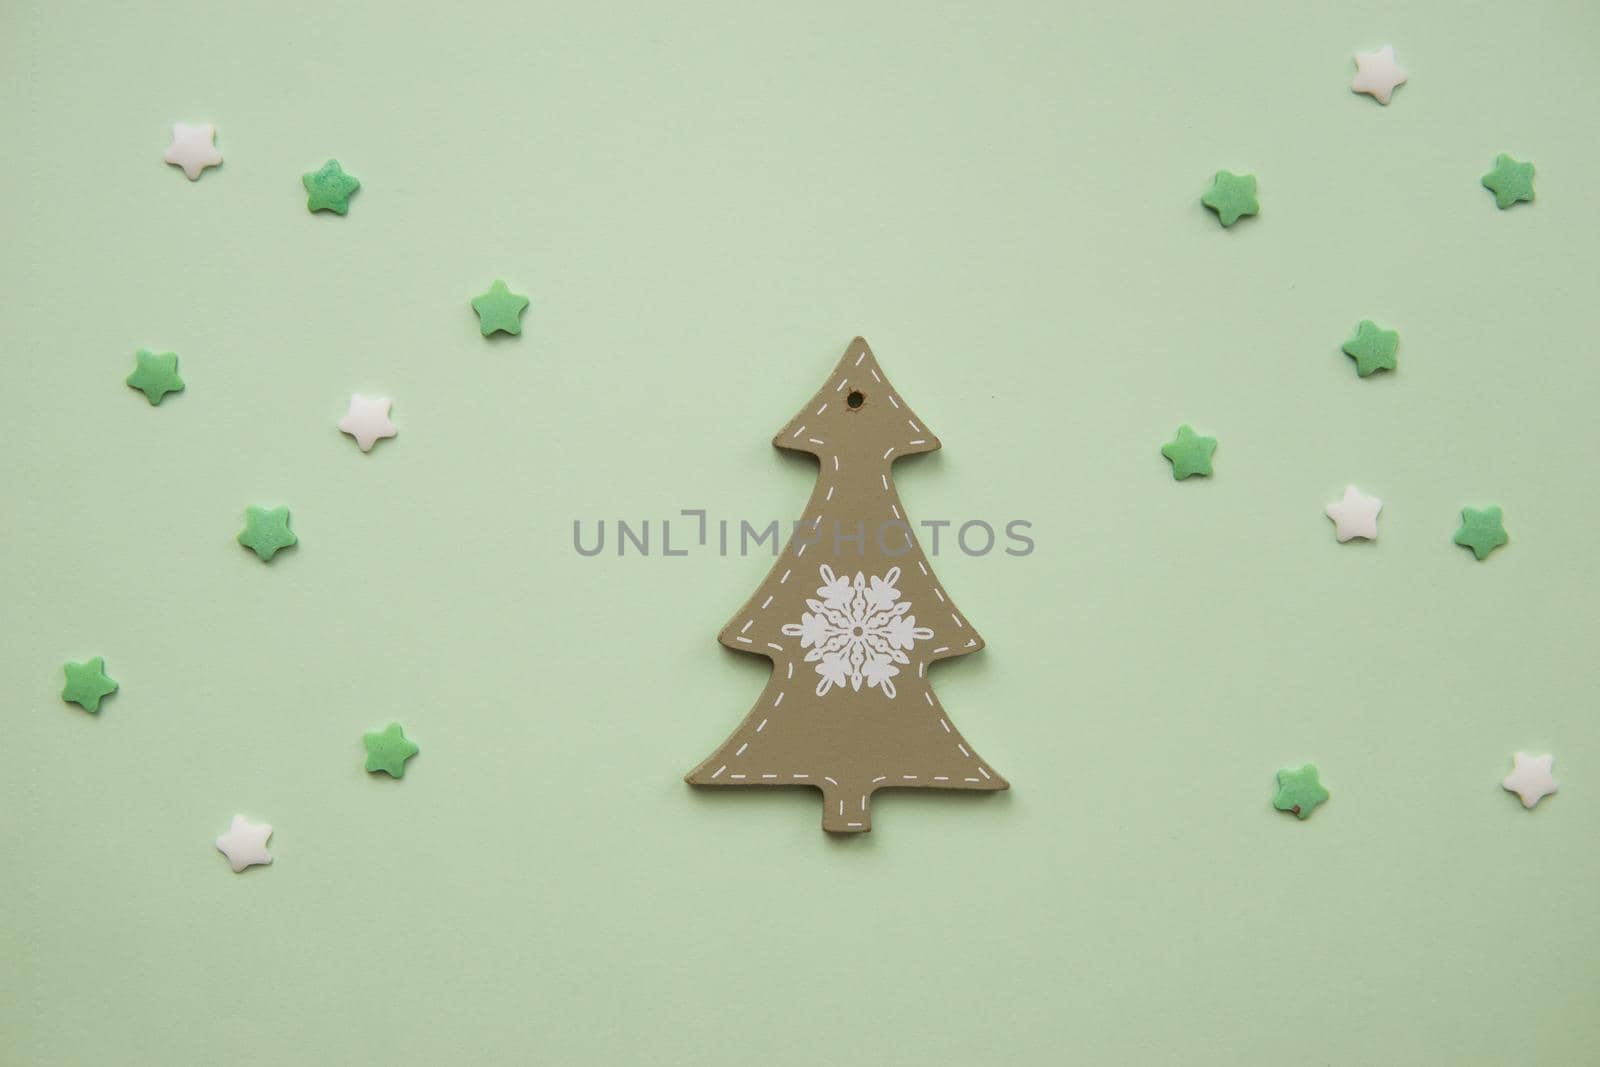 Christmas decorations decorative background. Decorative wooden white Christmas tree toy in the shape of a Christmas tree on a green background. Top view, minimalism, flat lay